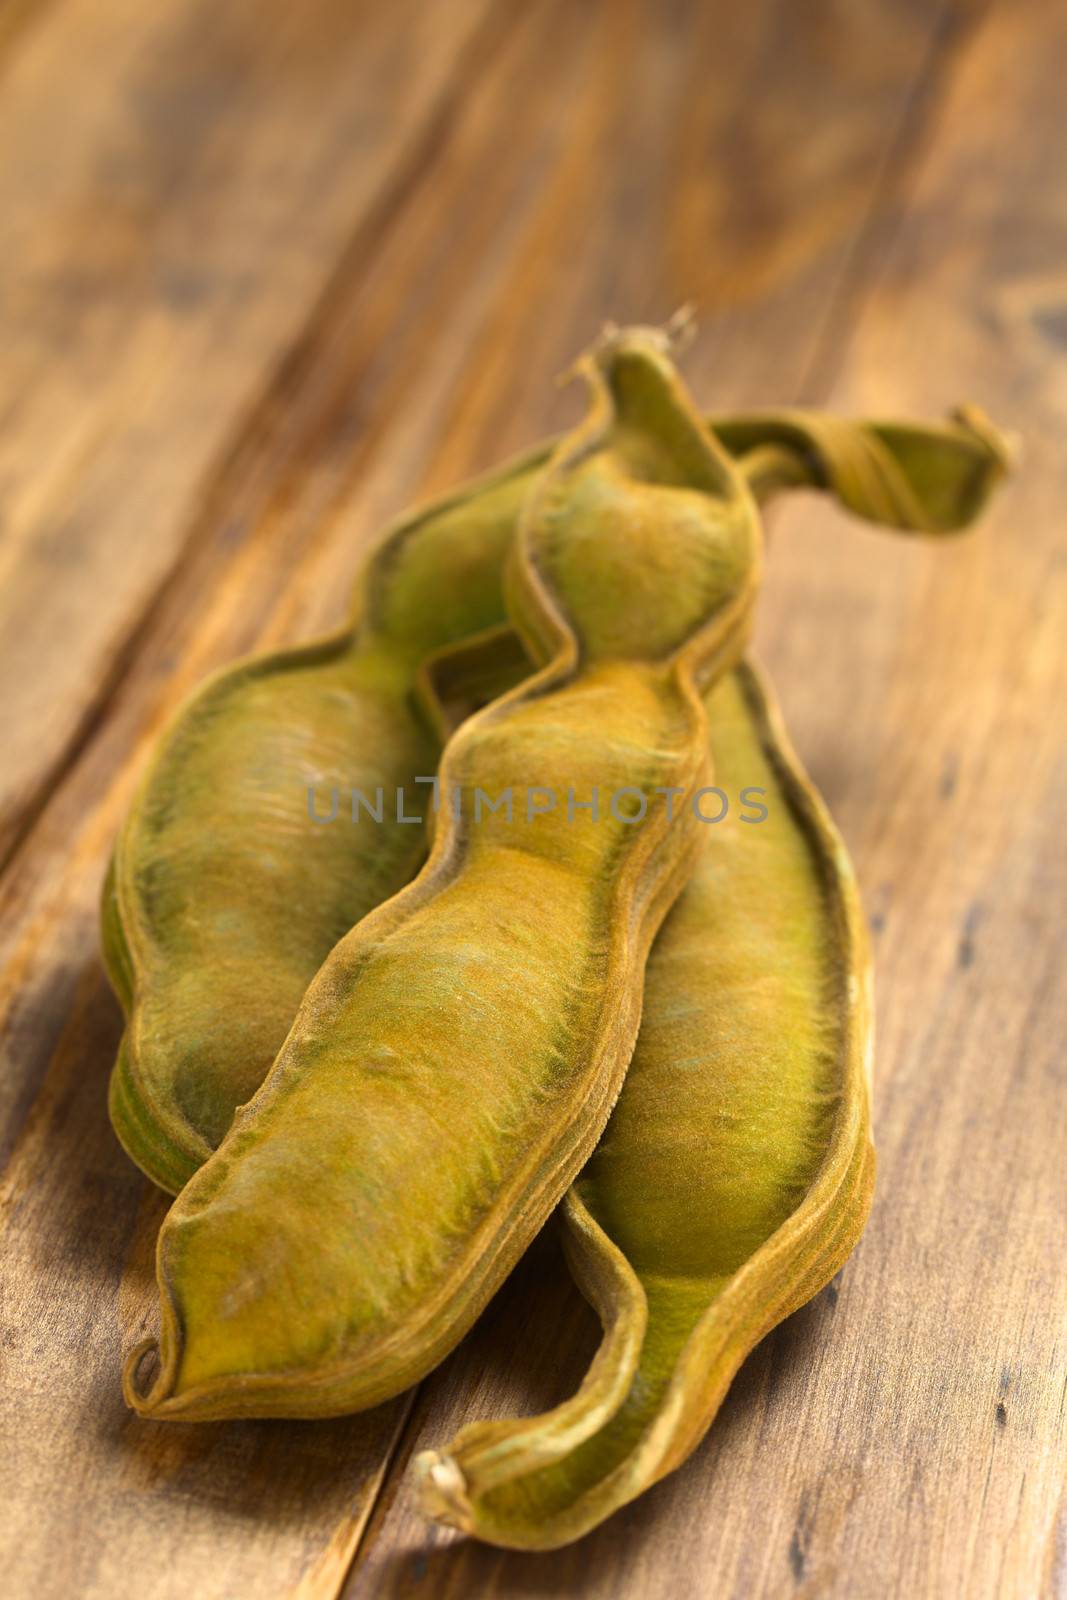 Peruvian fruit called Pacay (lat. Inga feuilleei), which is a podded fruit of which the sweet white pulp surrounding the seeds is being eaten (Selective Focus, Focus one third into the image)